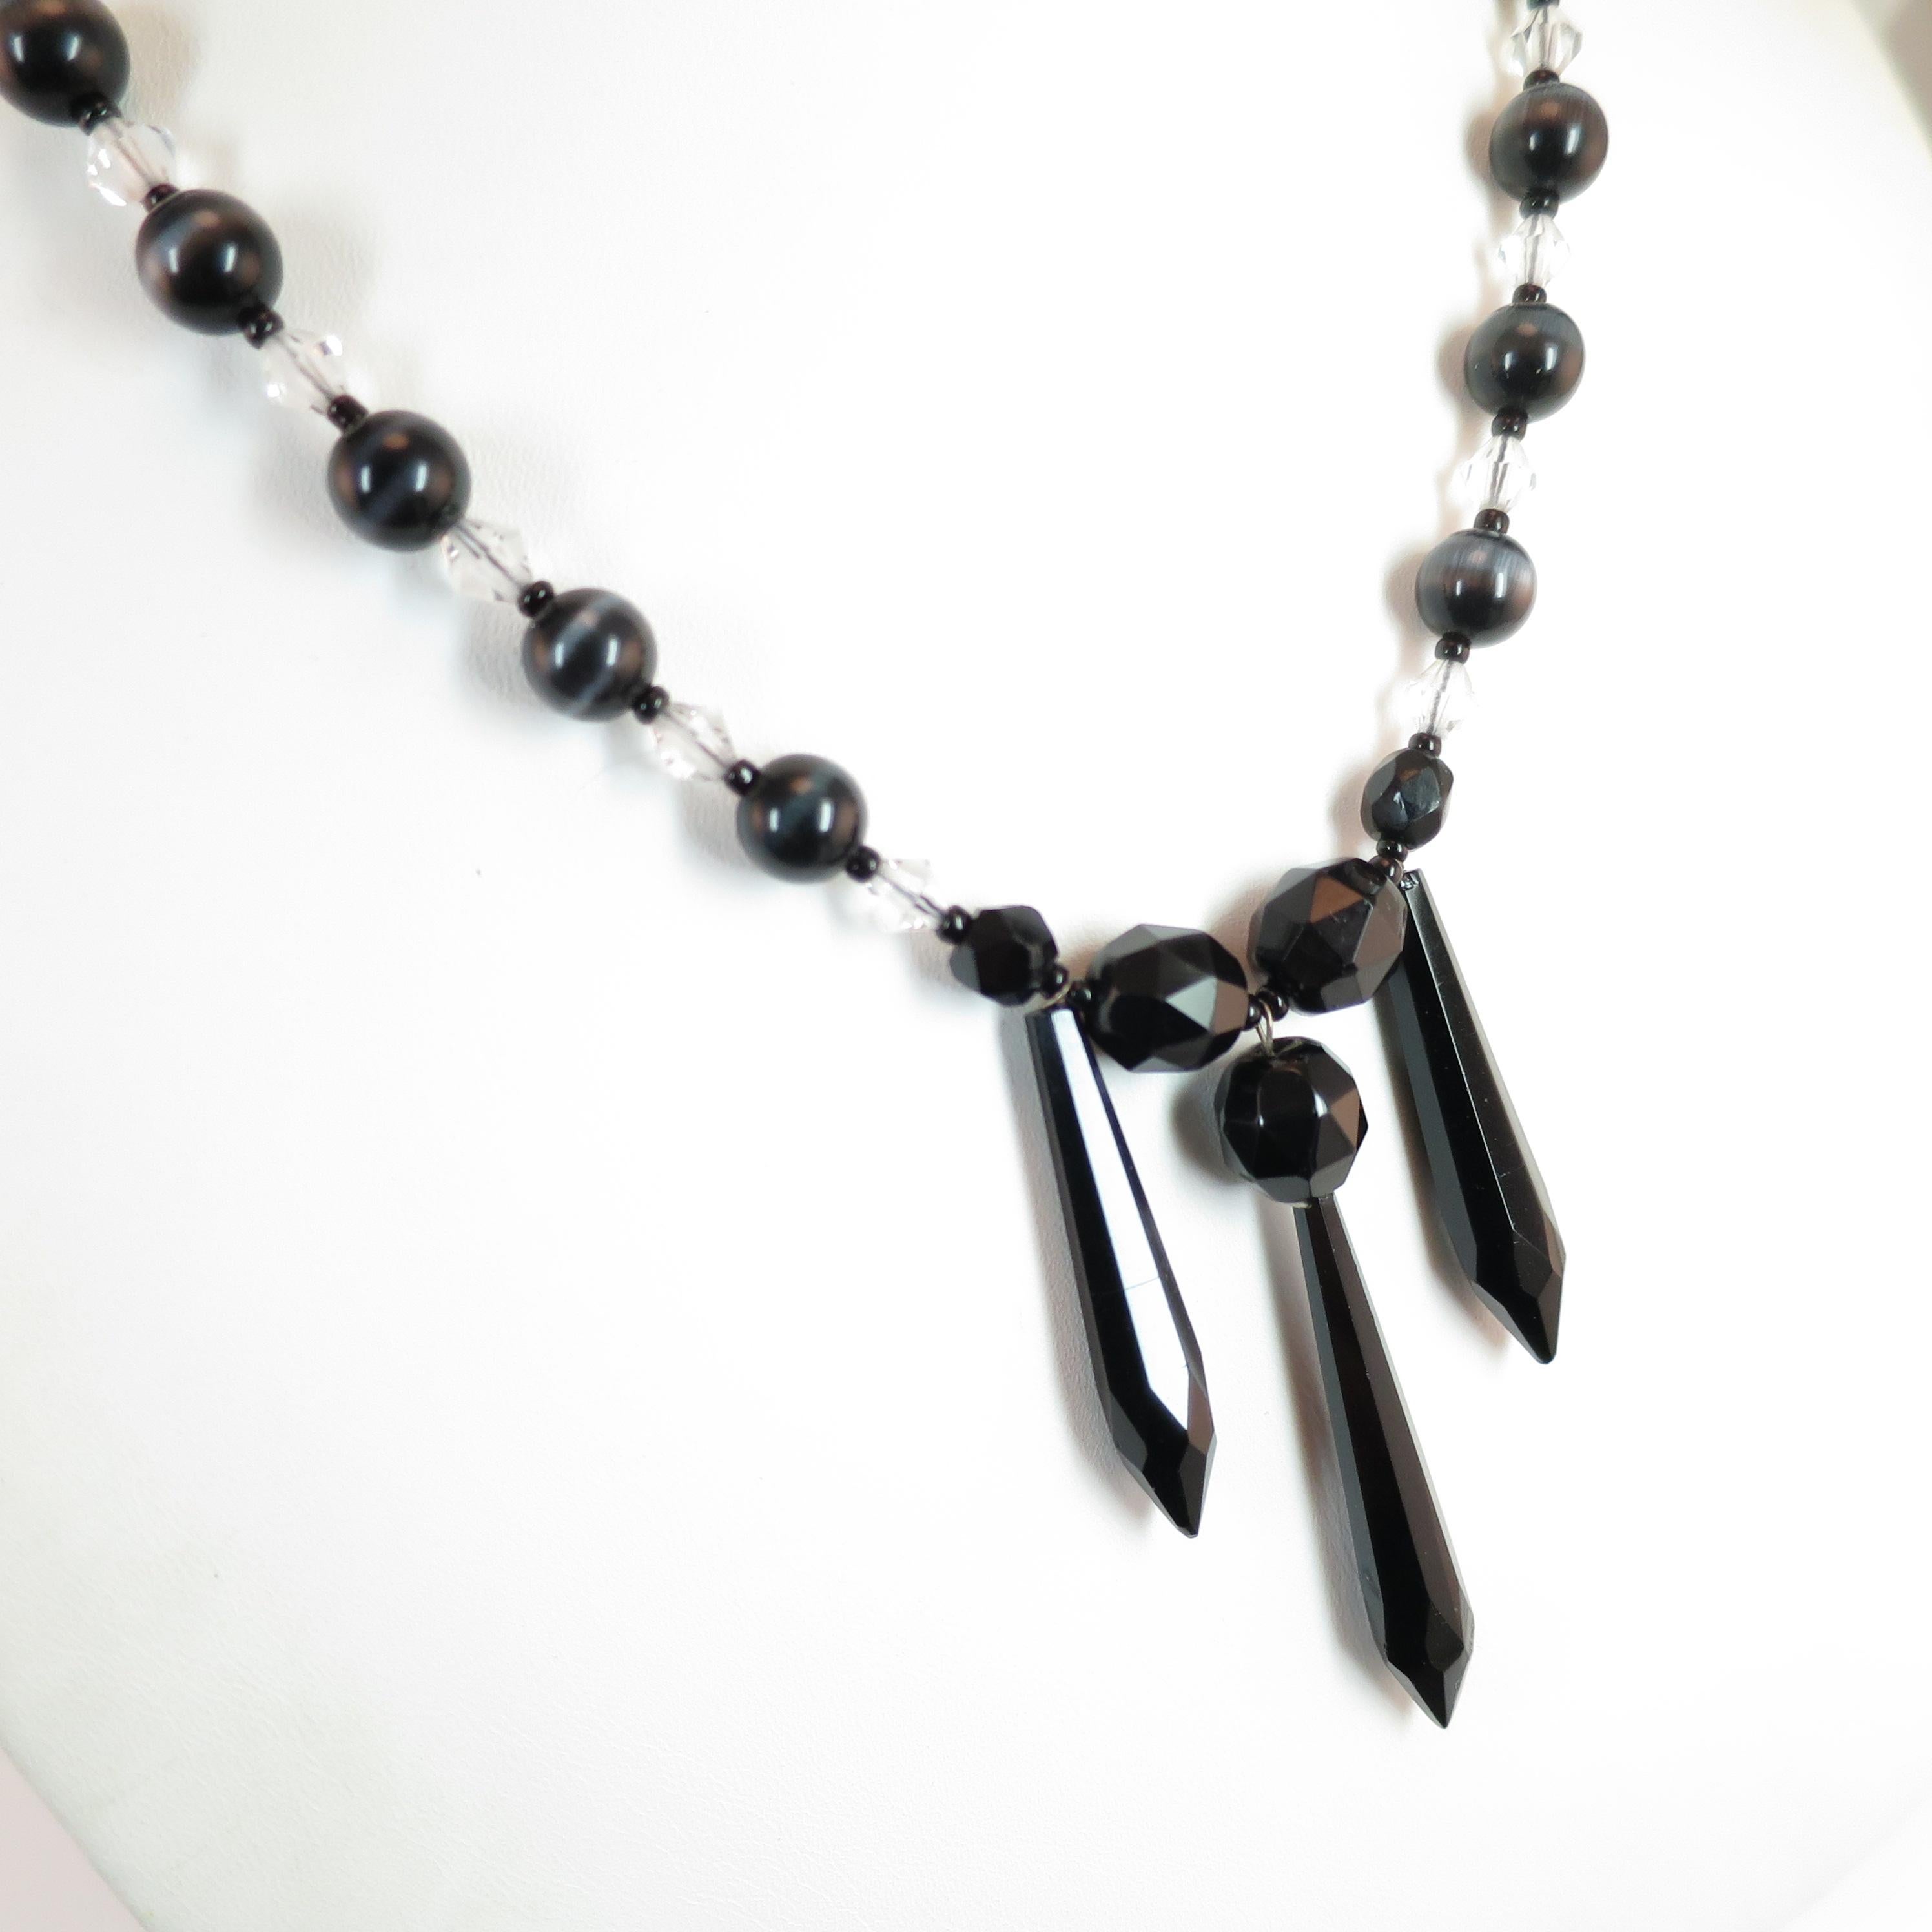 Offered here is a Victorian mourning necklace & matching drop earrings from the 1890s. The necklace presents a centerpiece of faceted French jet black glass beads above three elongated faceted jet drops; to either side there are strands of polished